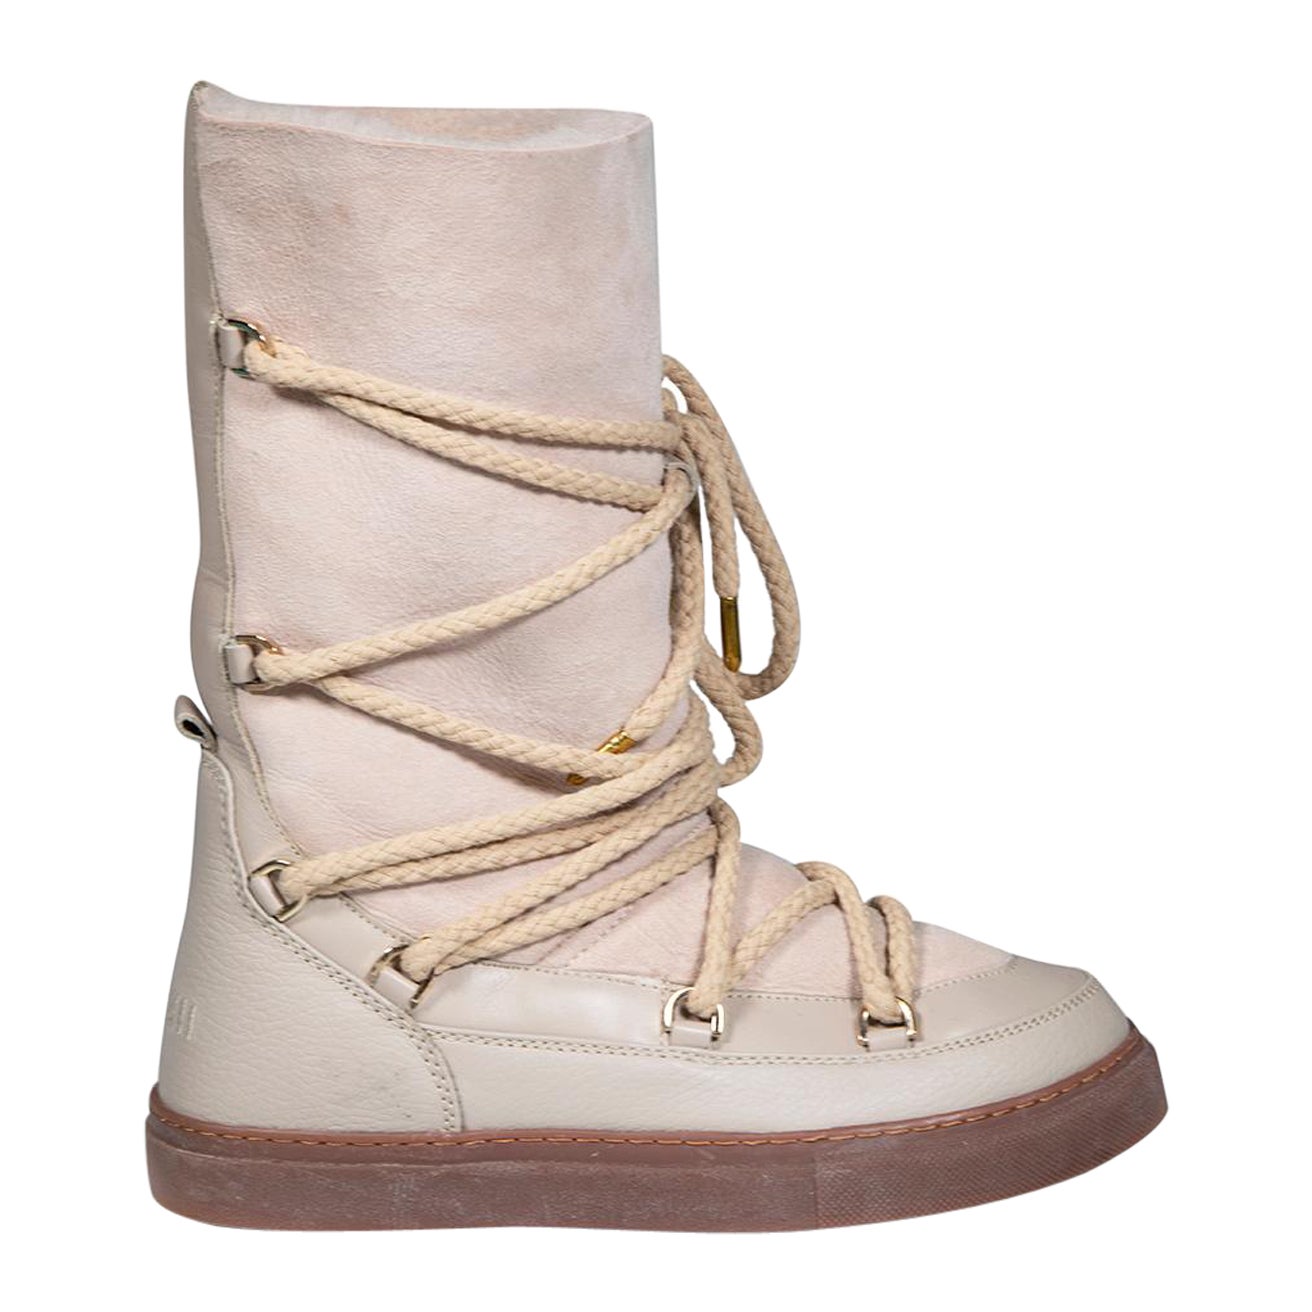 Inuikii Beige Suede Shearling Lined Snow Boots Size IT 40 For Sale